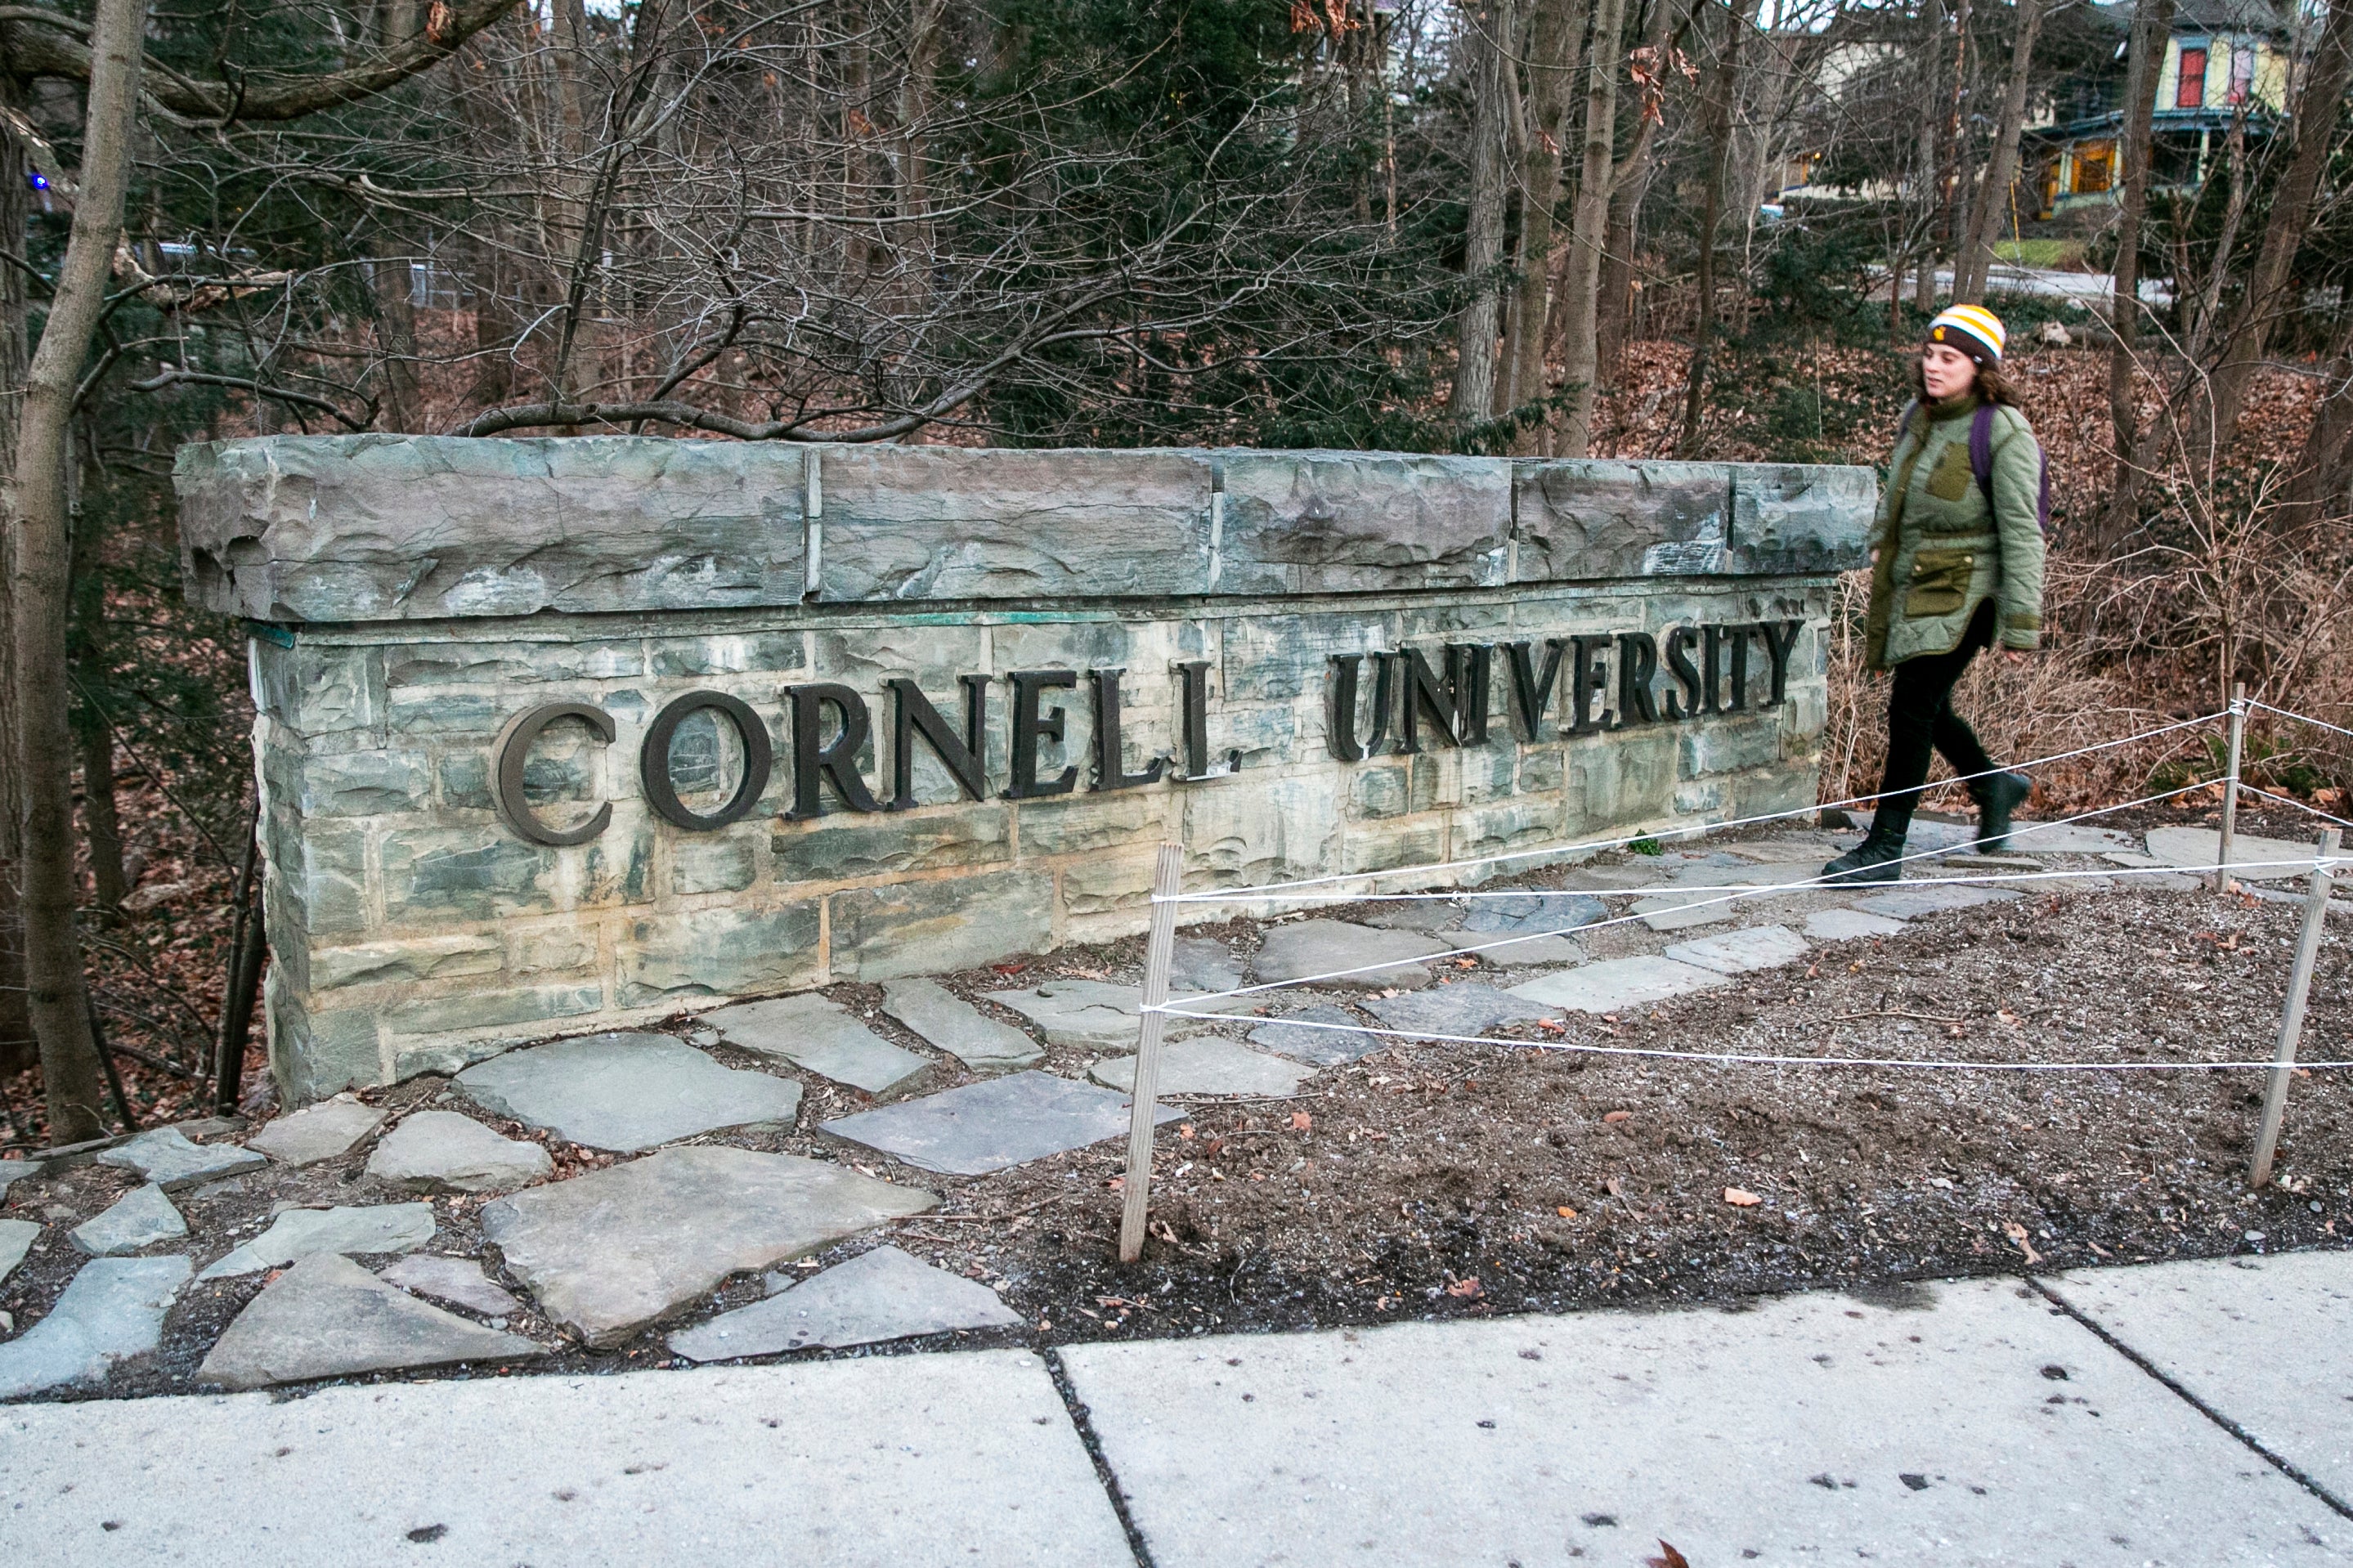 Cornell University has been placed on high alert after a series of ‘horrendous, antisemitic’ threats were made against the school’s Jewish community